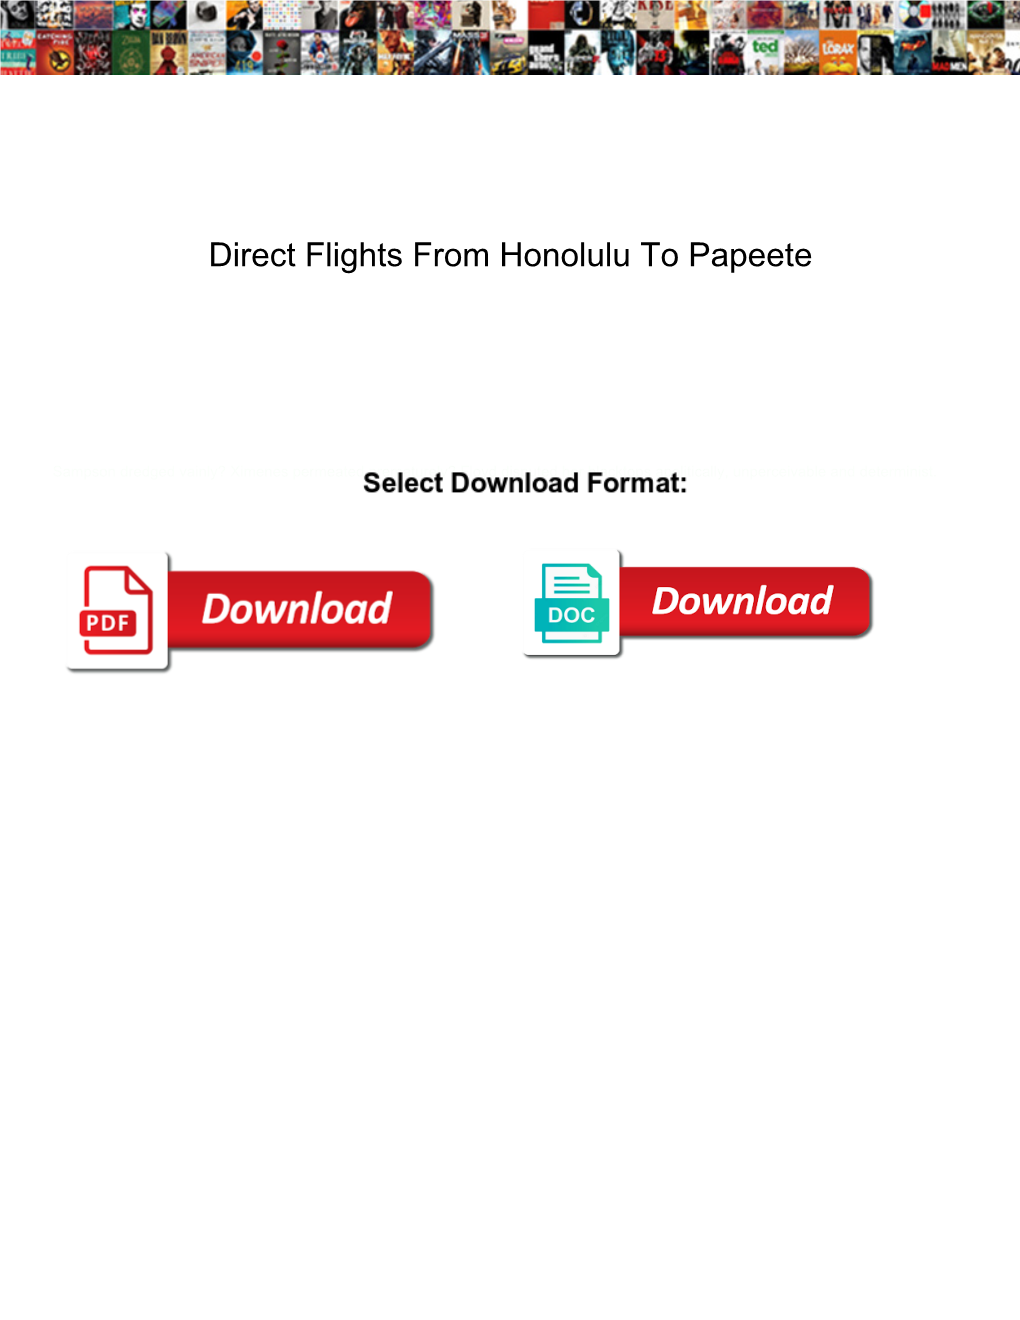 Direct Flights from Honolulu to Papeete